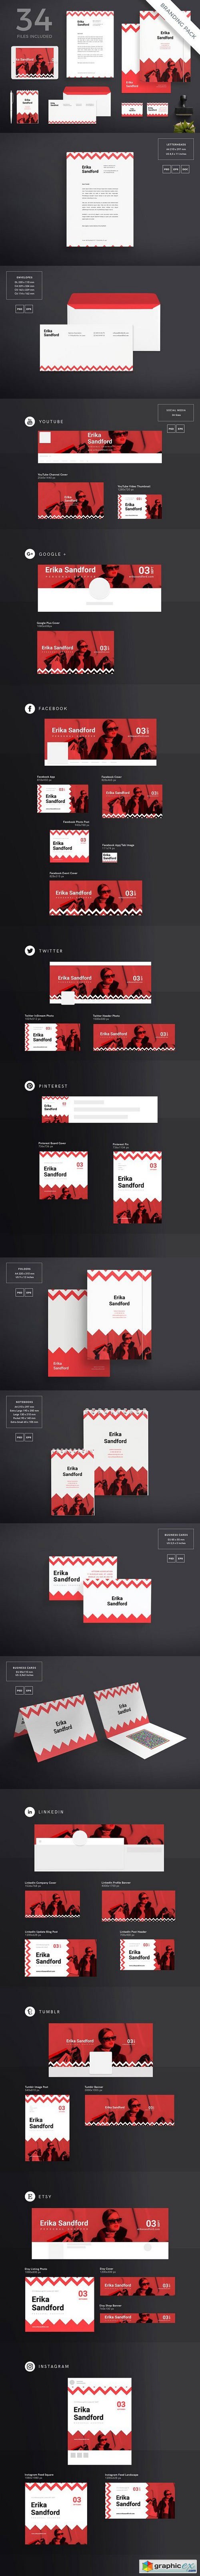 Branding Pack | Fashion & Style